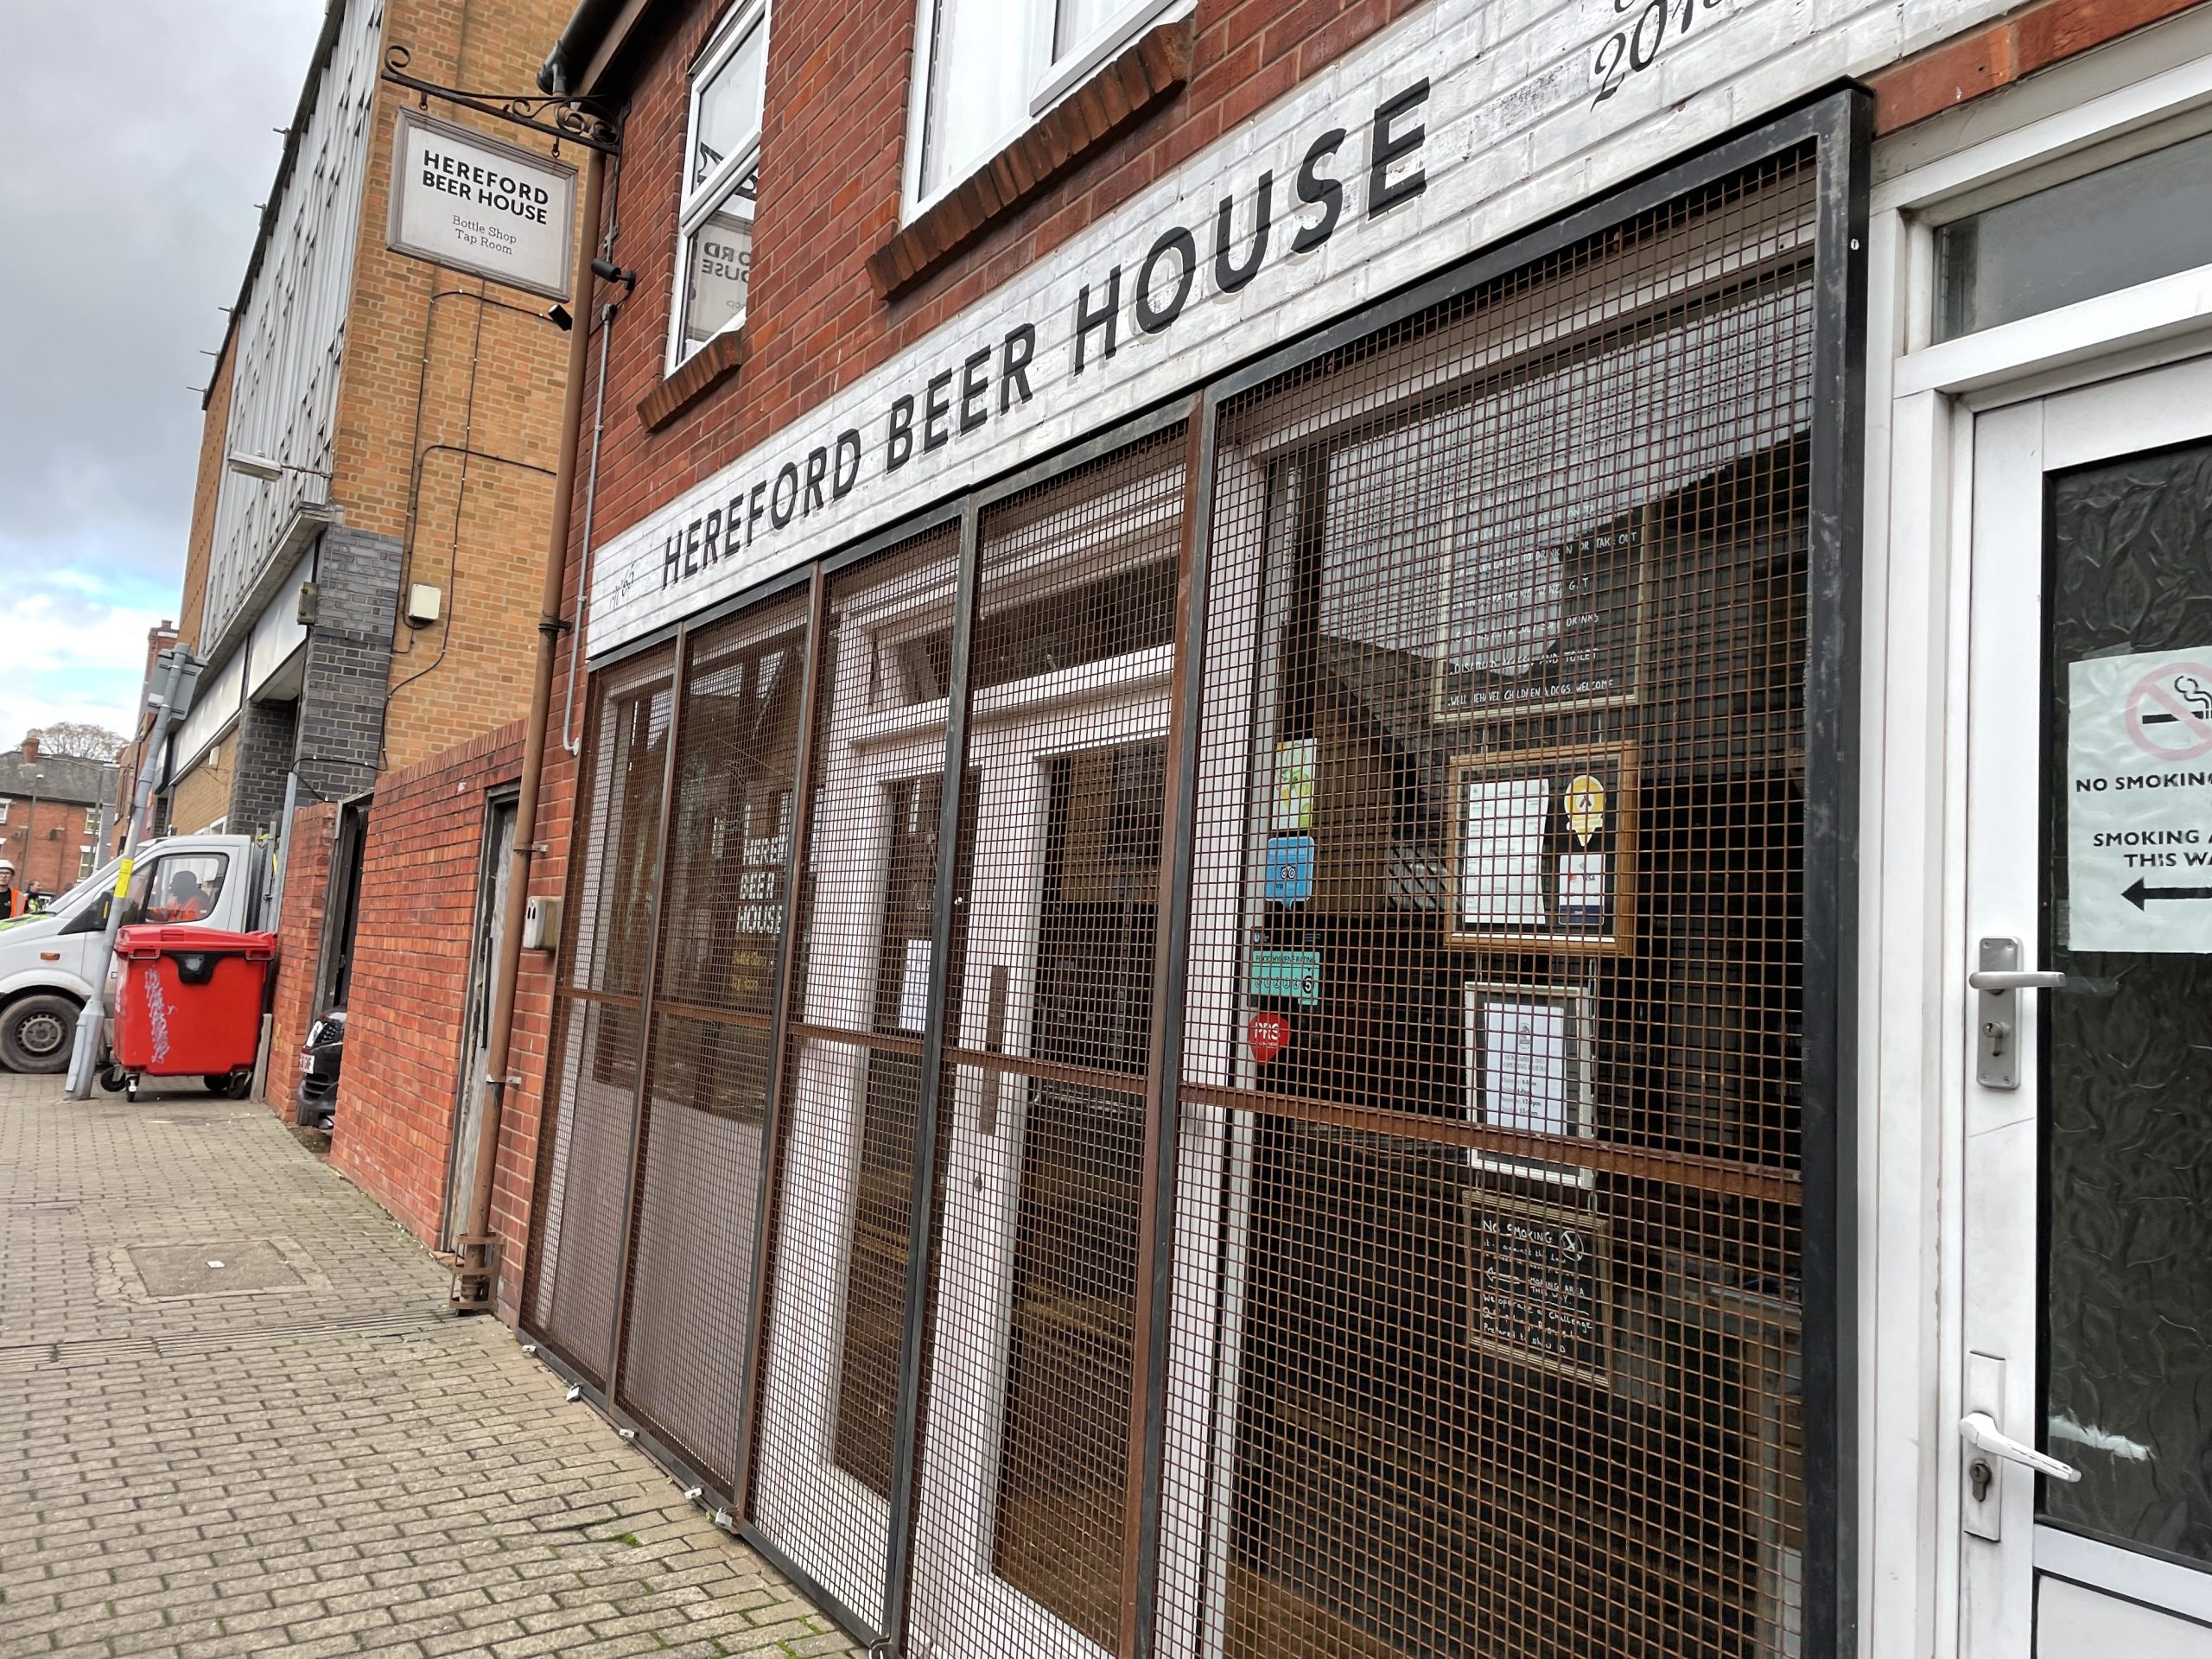 NEWS | Hereford Beer House to have new owners from January